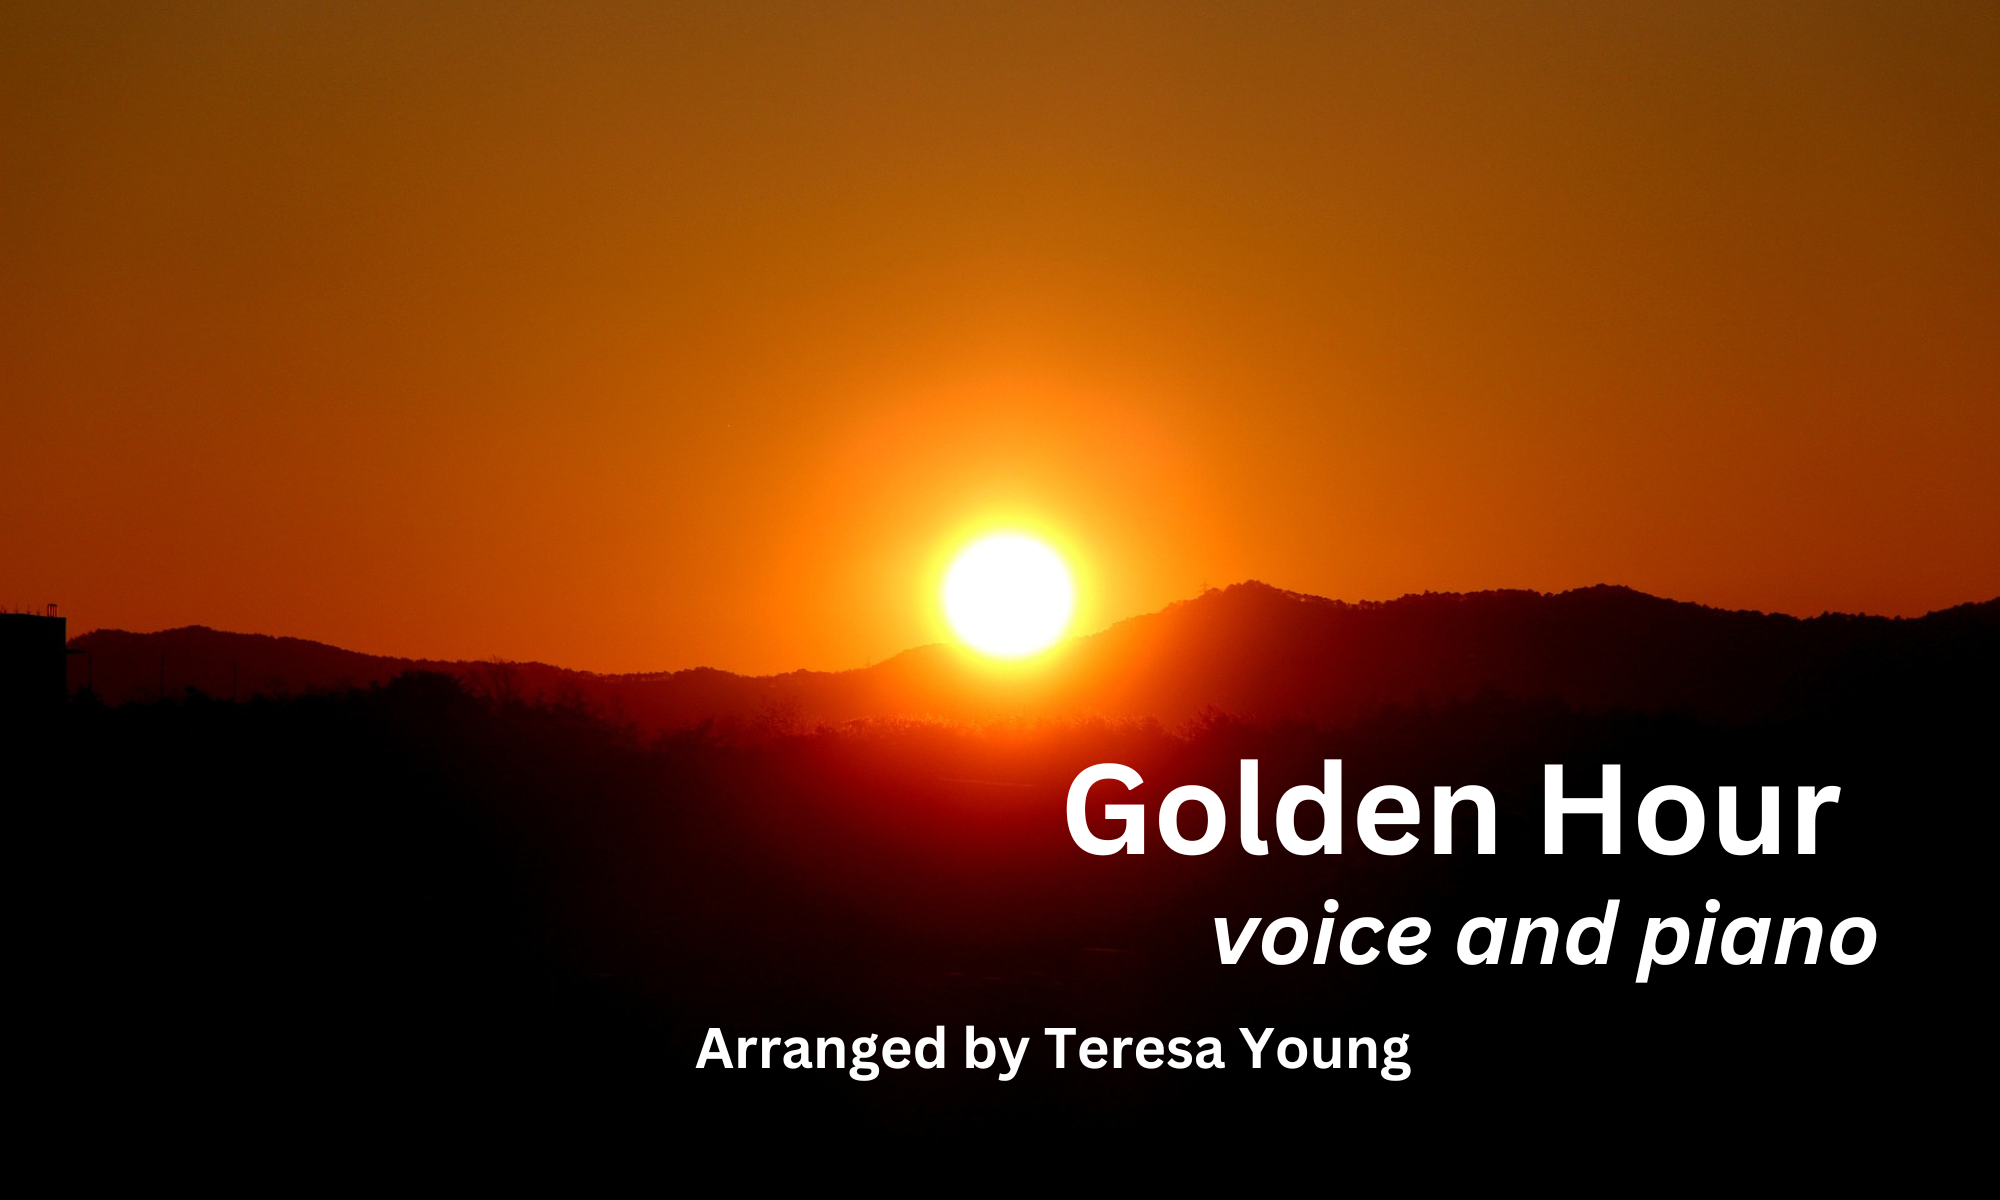 Golden Hour, voice and piano, arr. Teresa Young